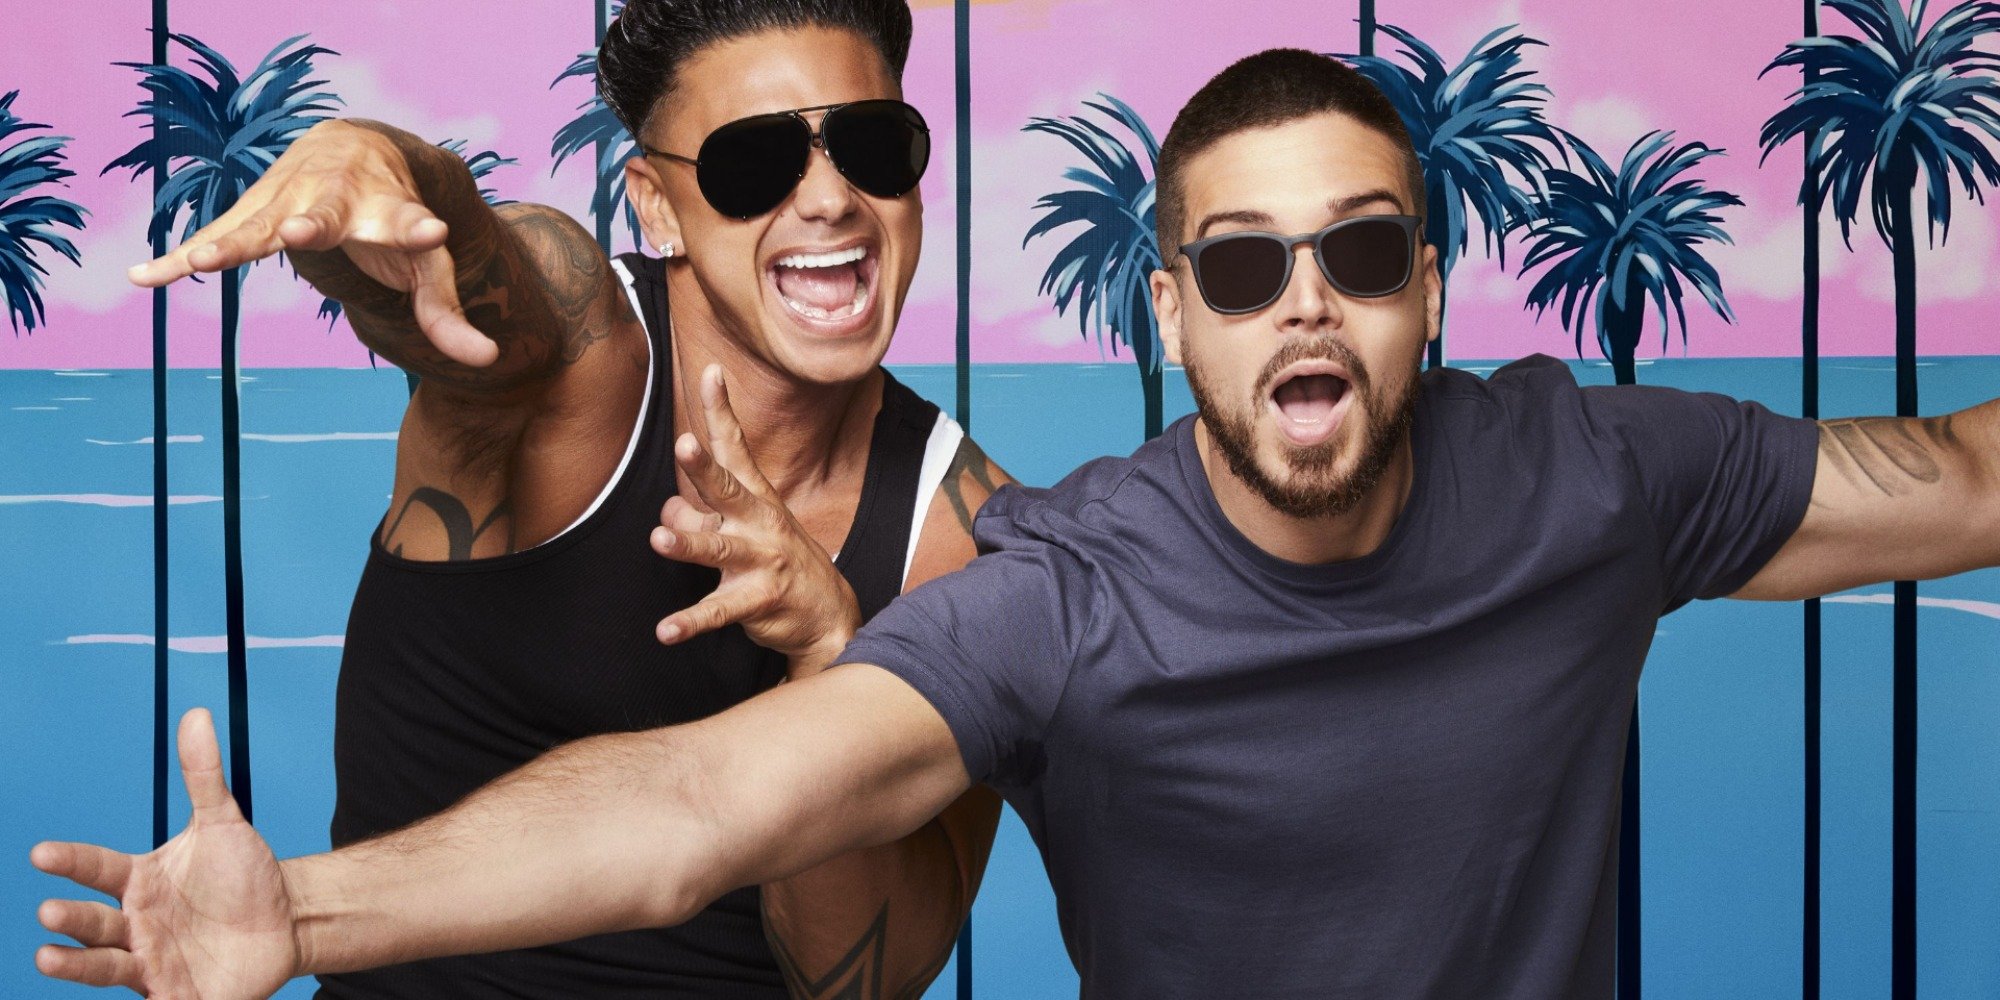 Paul "Pauly D" DelVecchio and Vinny Guadagnino in a publicity still for Jersey Shore: Family Vacation